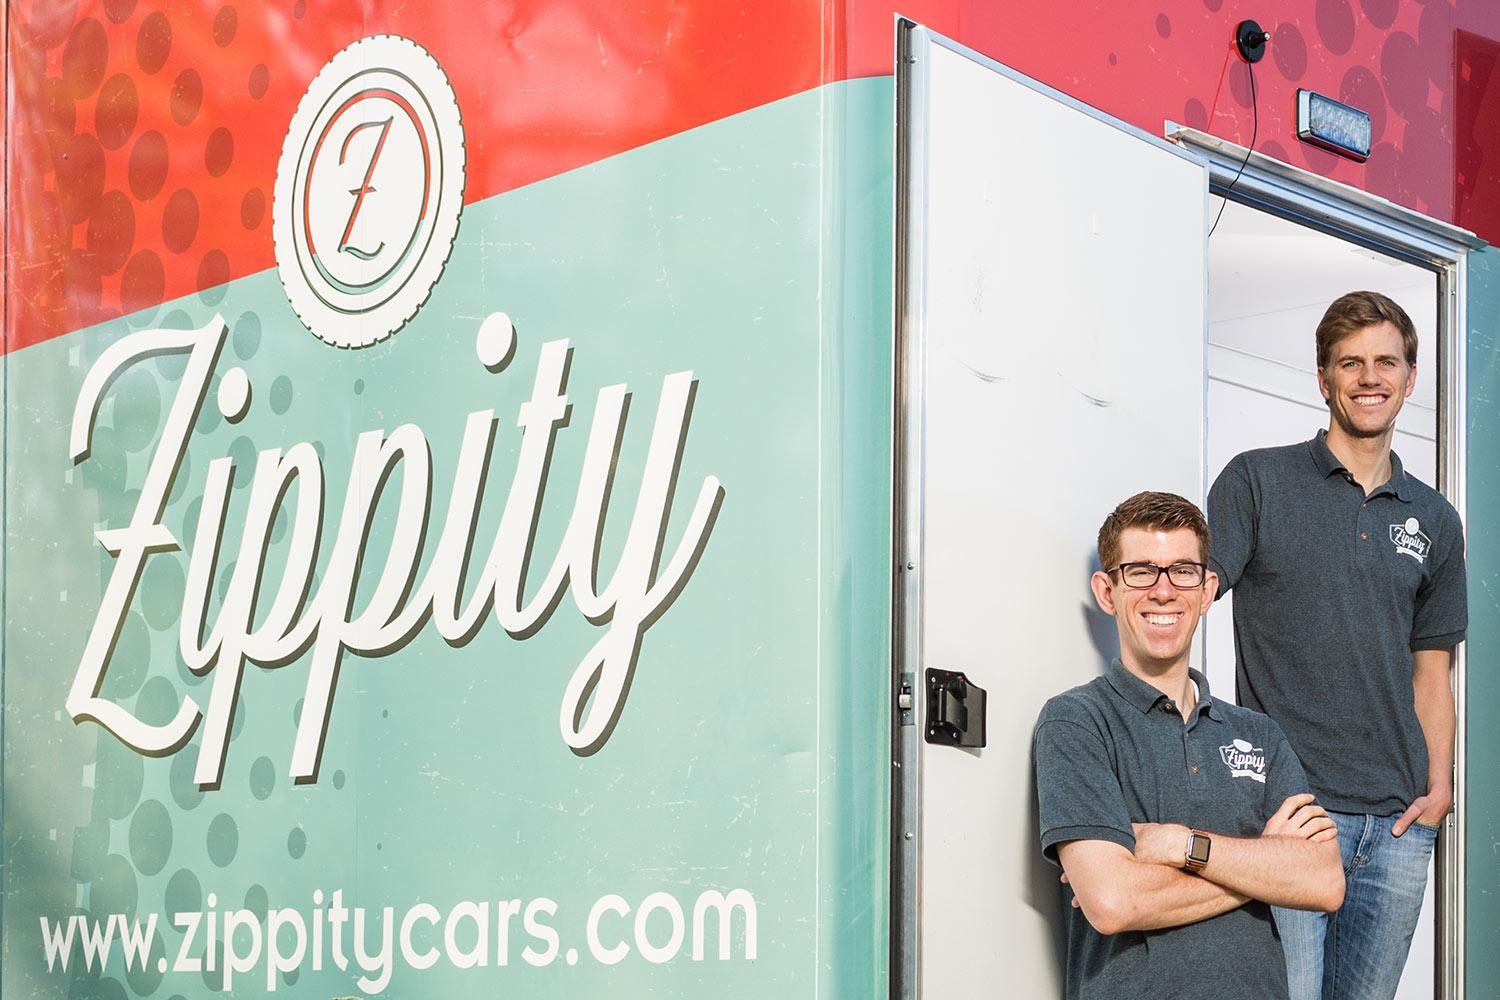 zippity-a-mobile-care-care-business-started-by-tuck-mbas.jpg